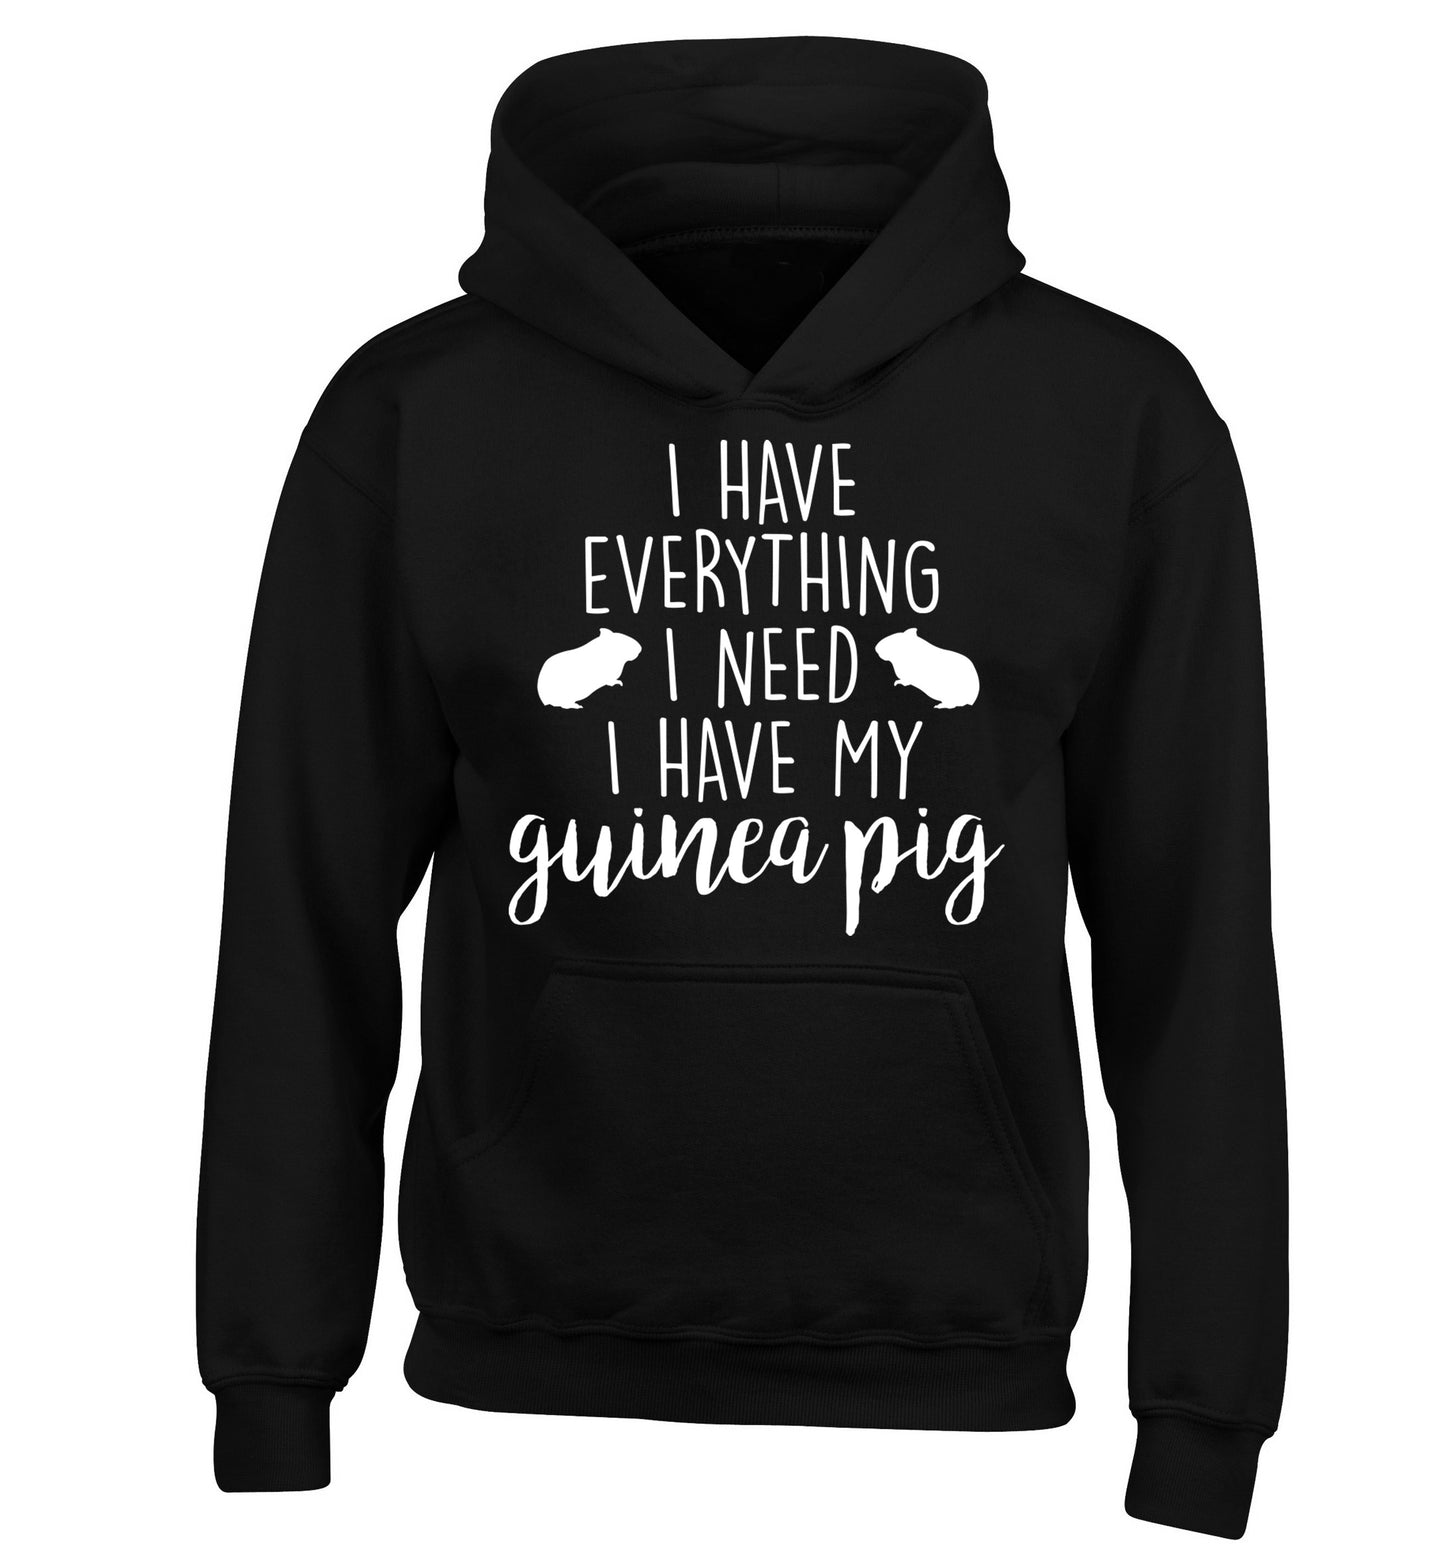 I have everything I need, I have my guinea pig children's black hoodie 12-14 Years